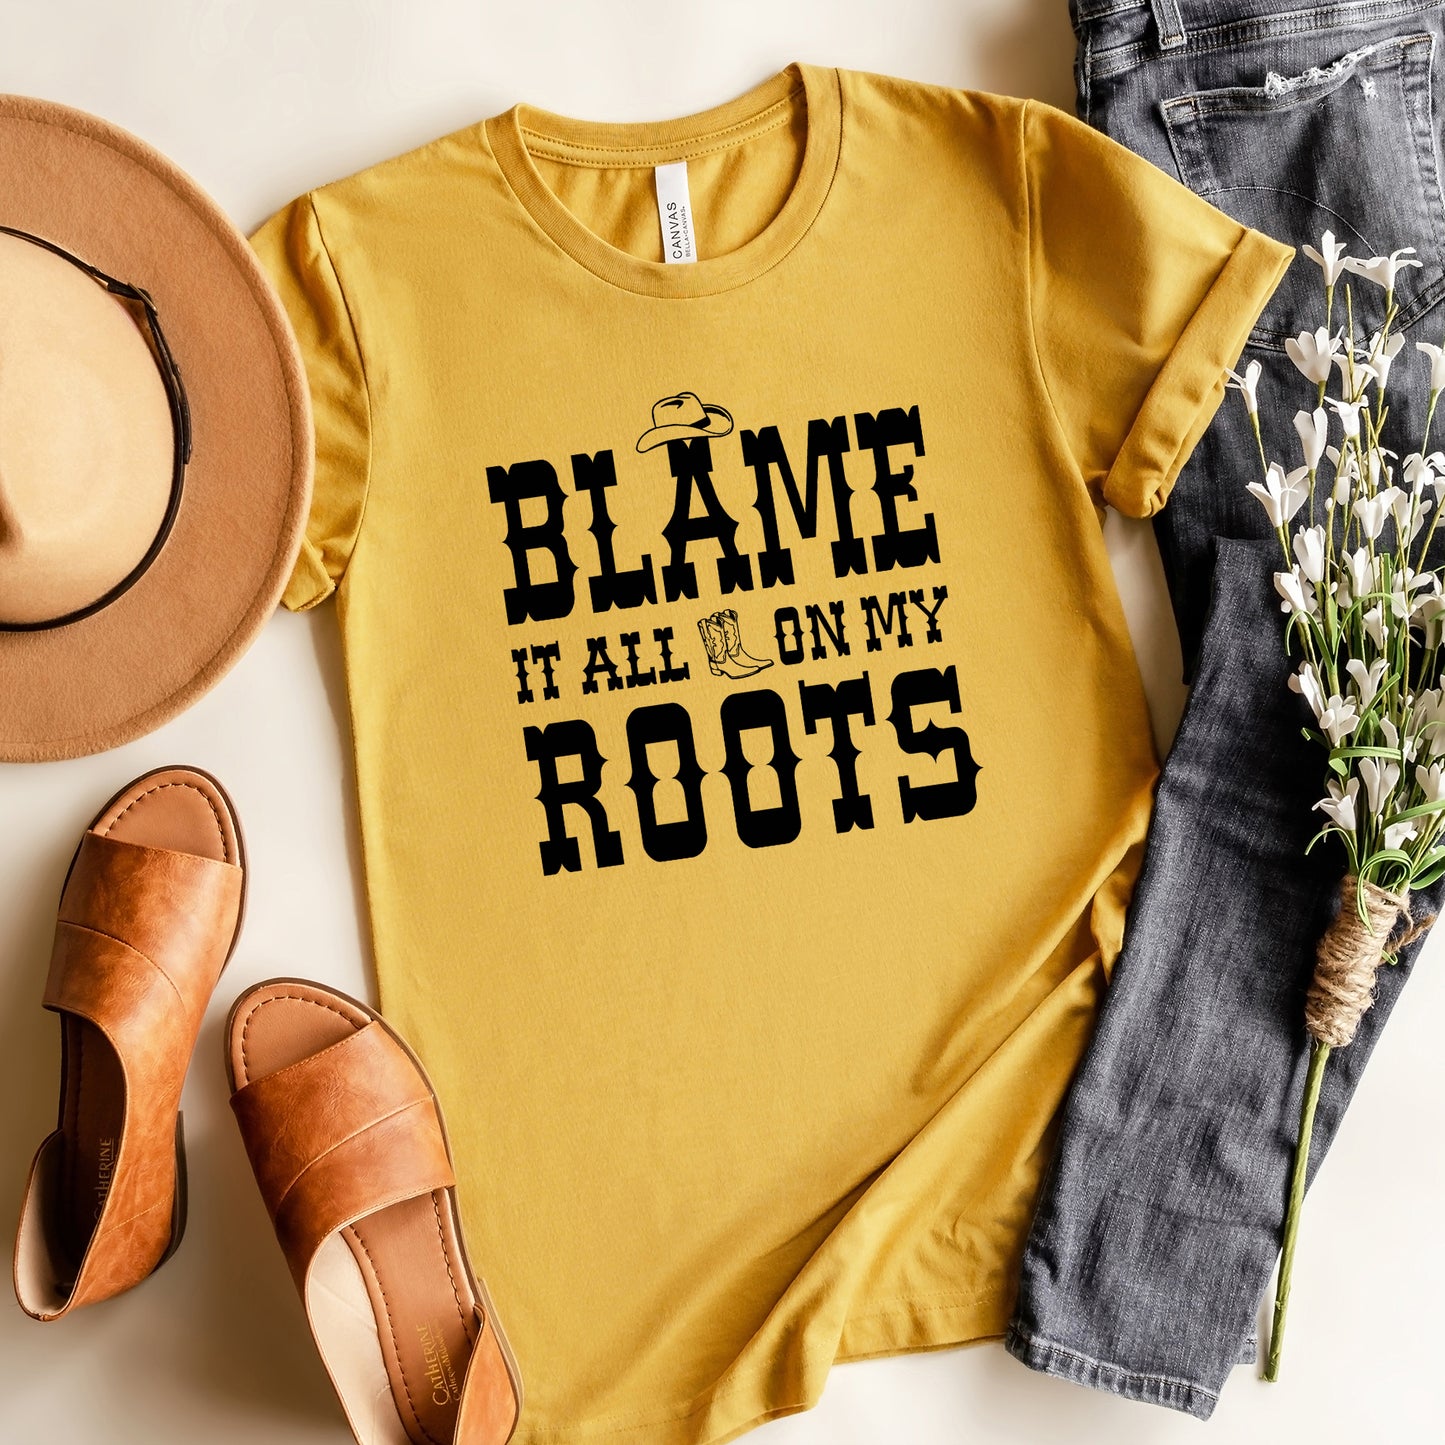 Blame It All On My Roots Hat And Boots | Short Sleeve Graphic Tee